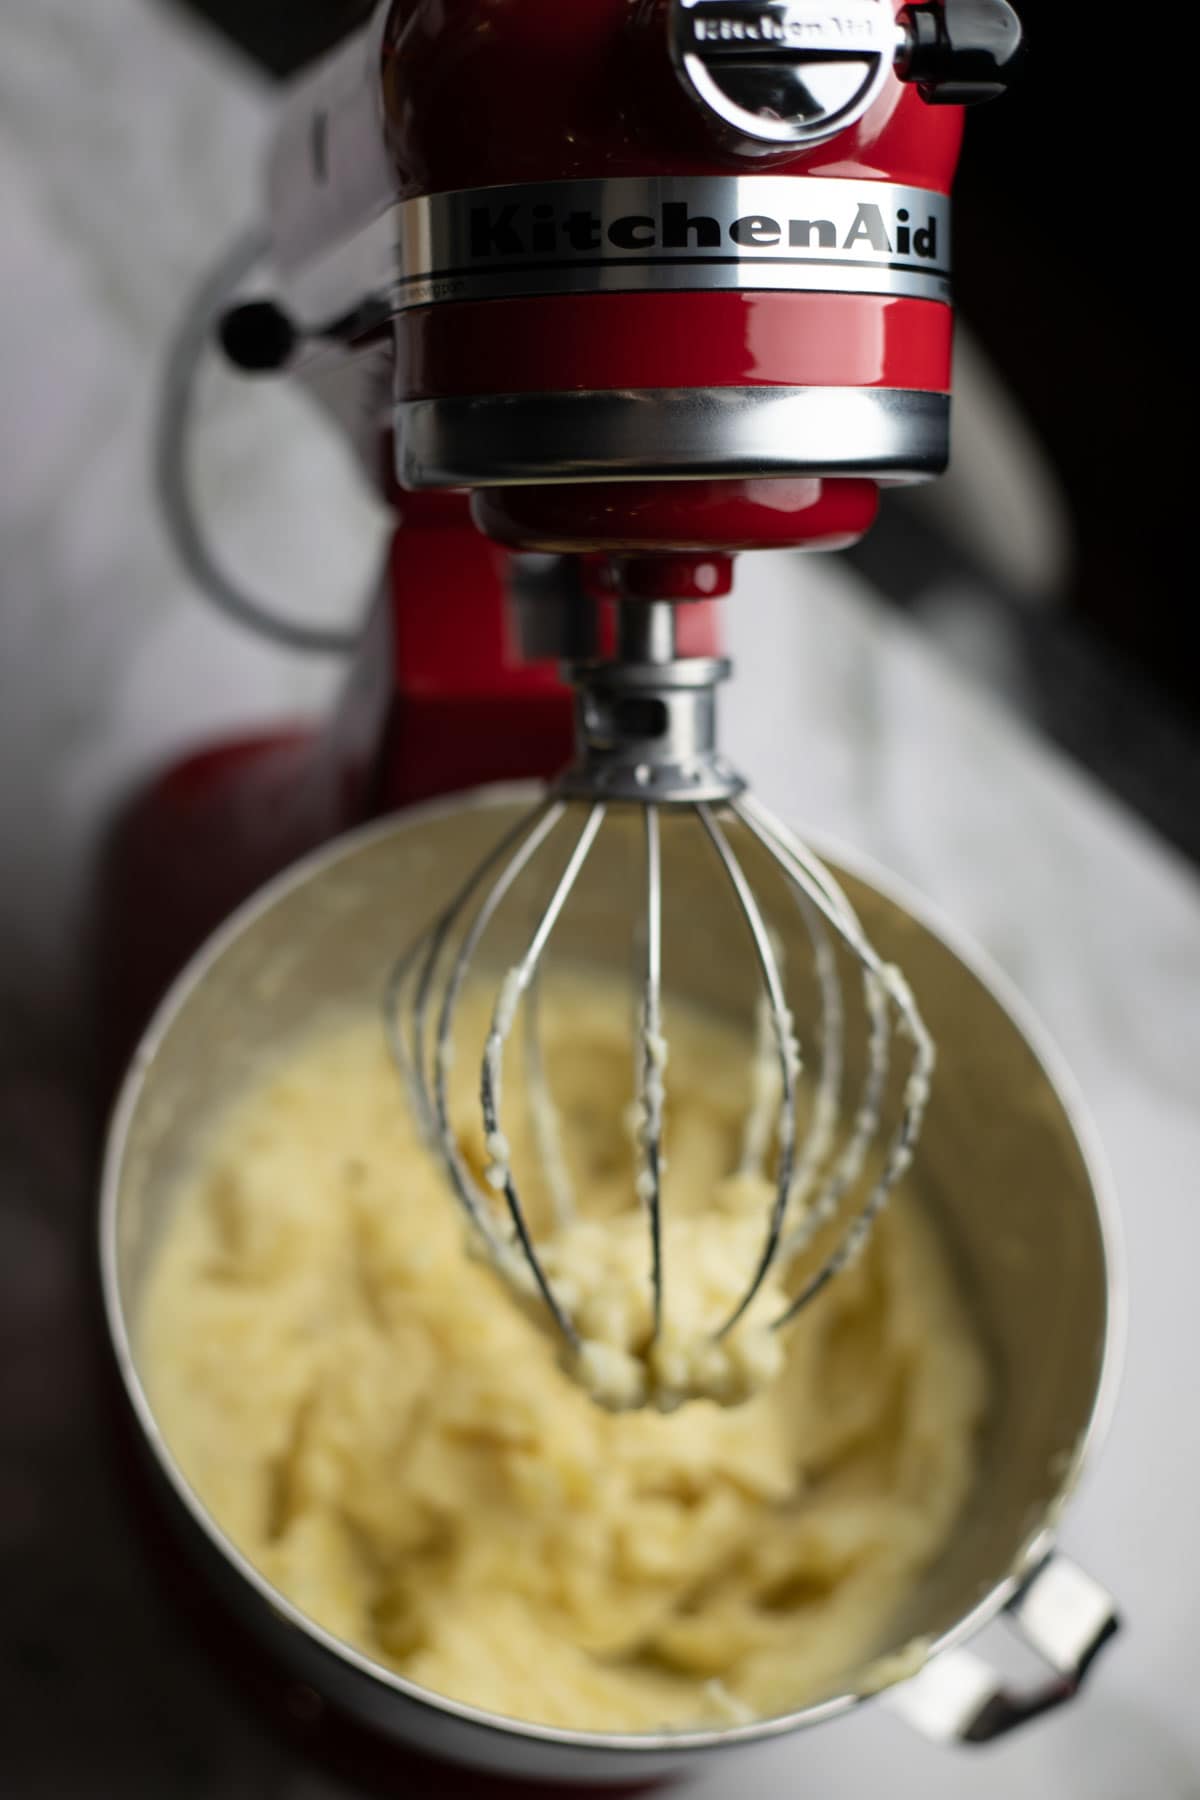 Red Kitchenaid stand mixer with mashed potatoes in bowl.